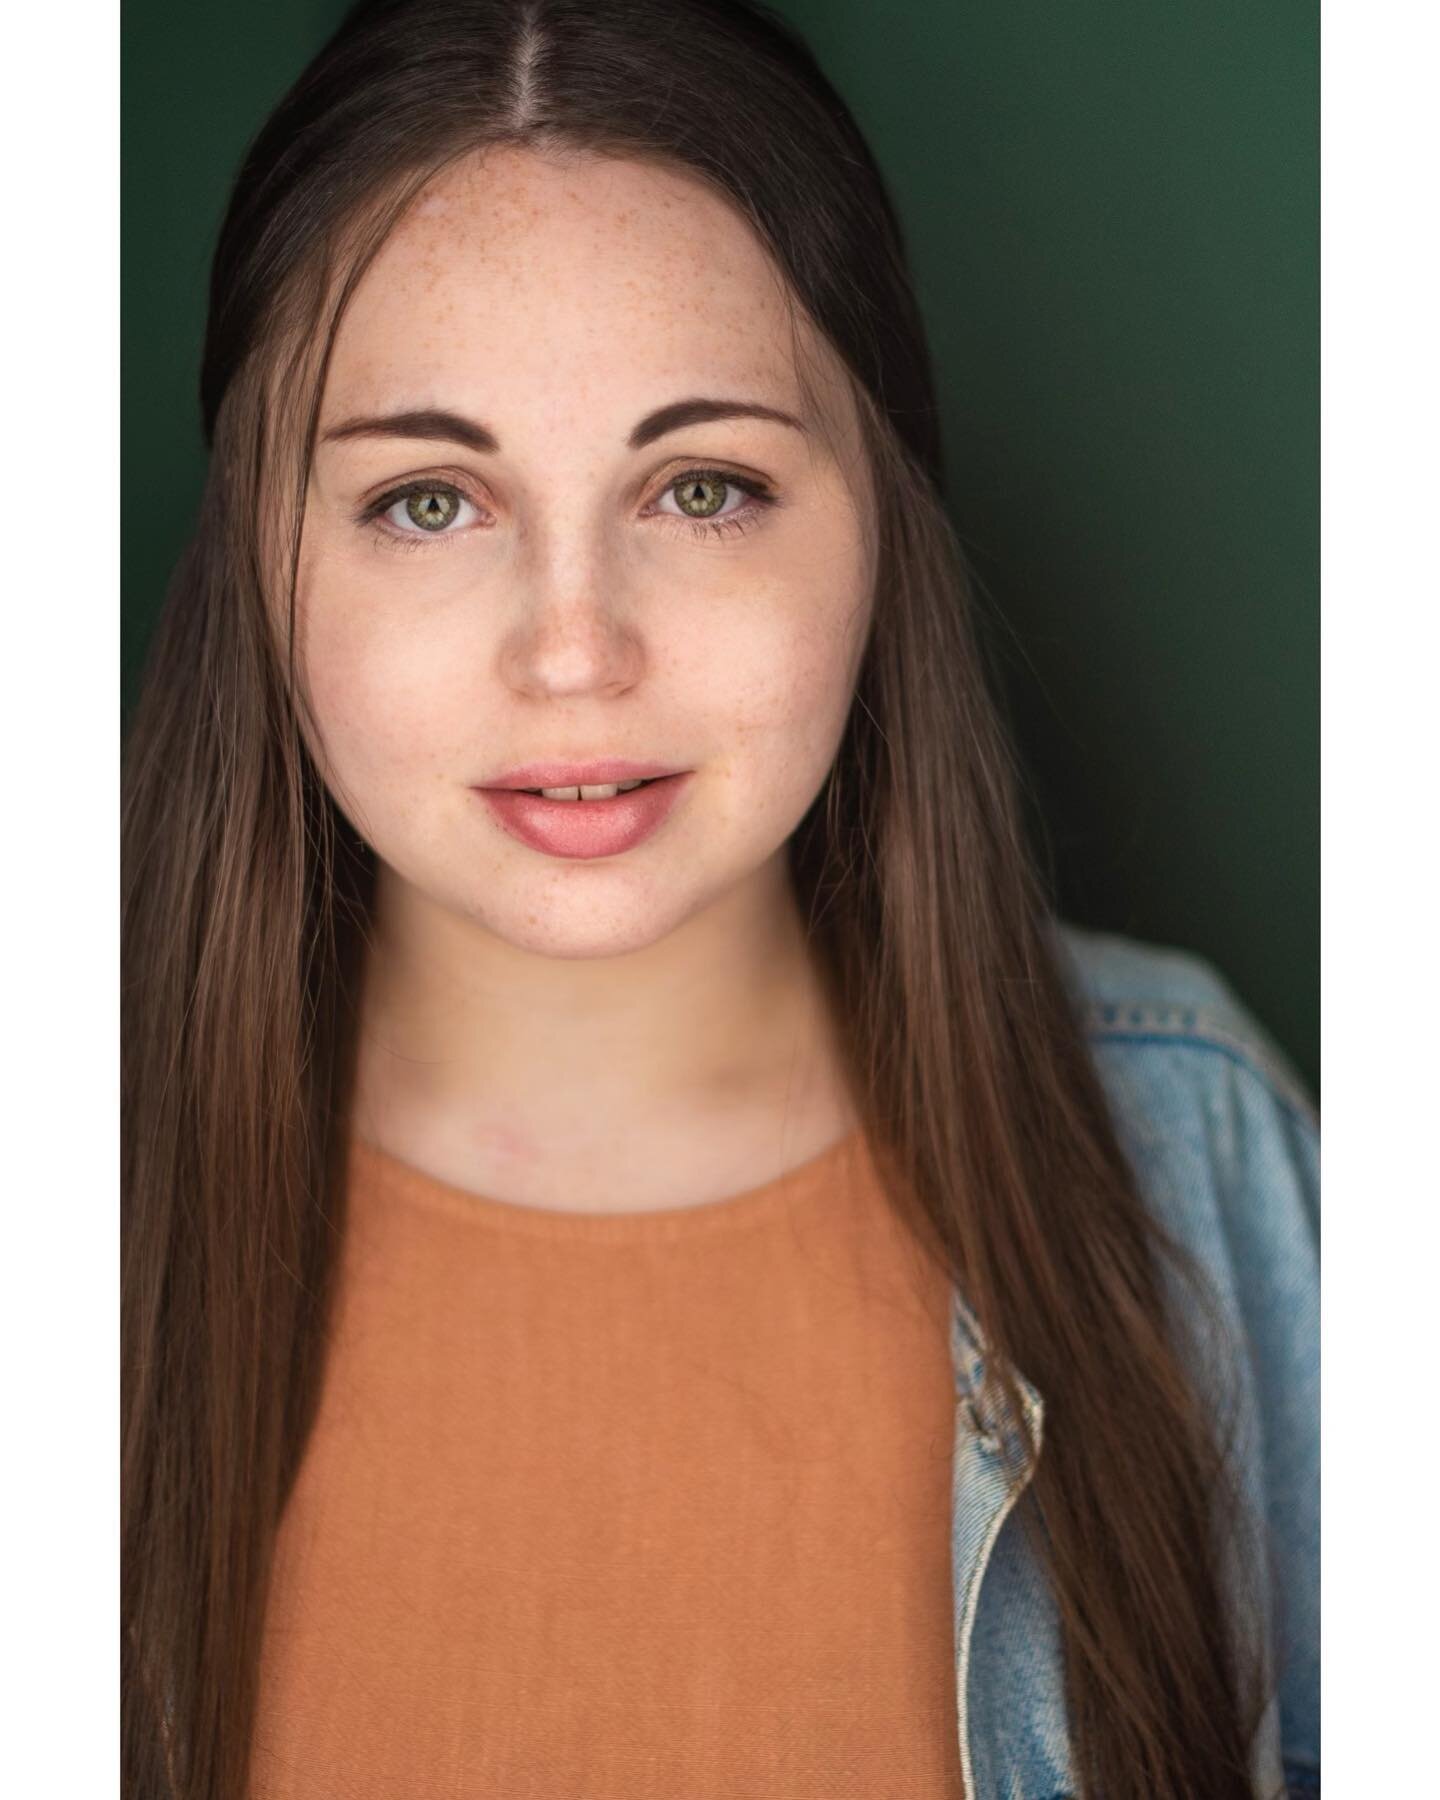 some cool new looks from @kylewatkinsphotography! 🥰 📸 
.
.
@glitter_talent #actor #actress #actorheadshot #actorheadshots #headshotphotographer #actressheadshot